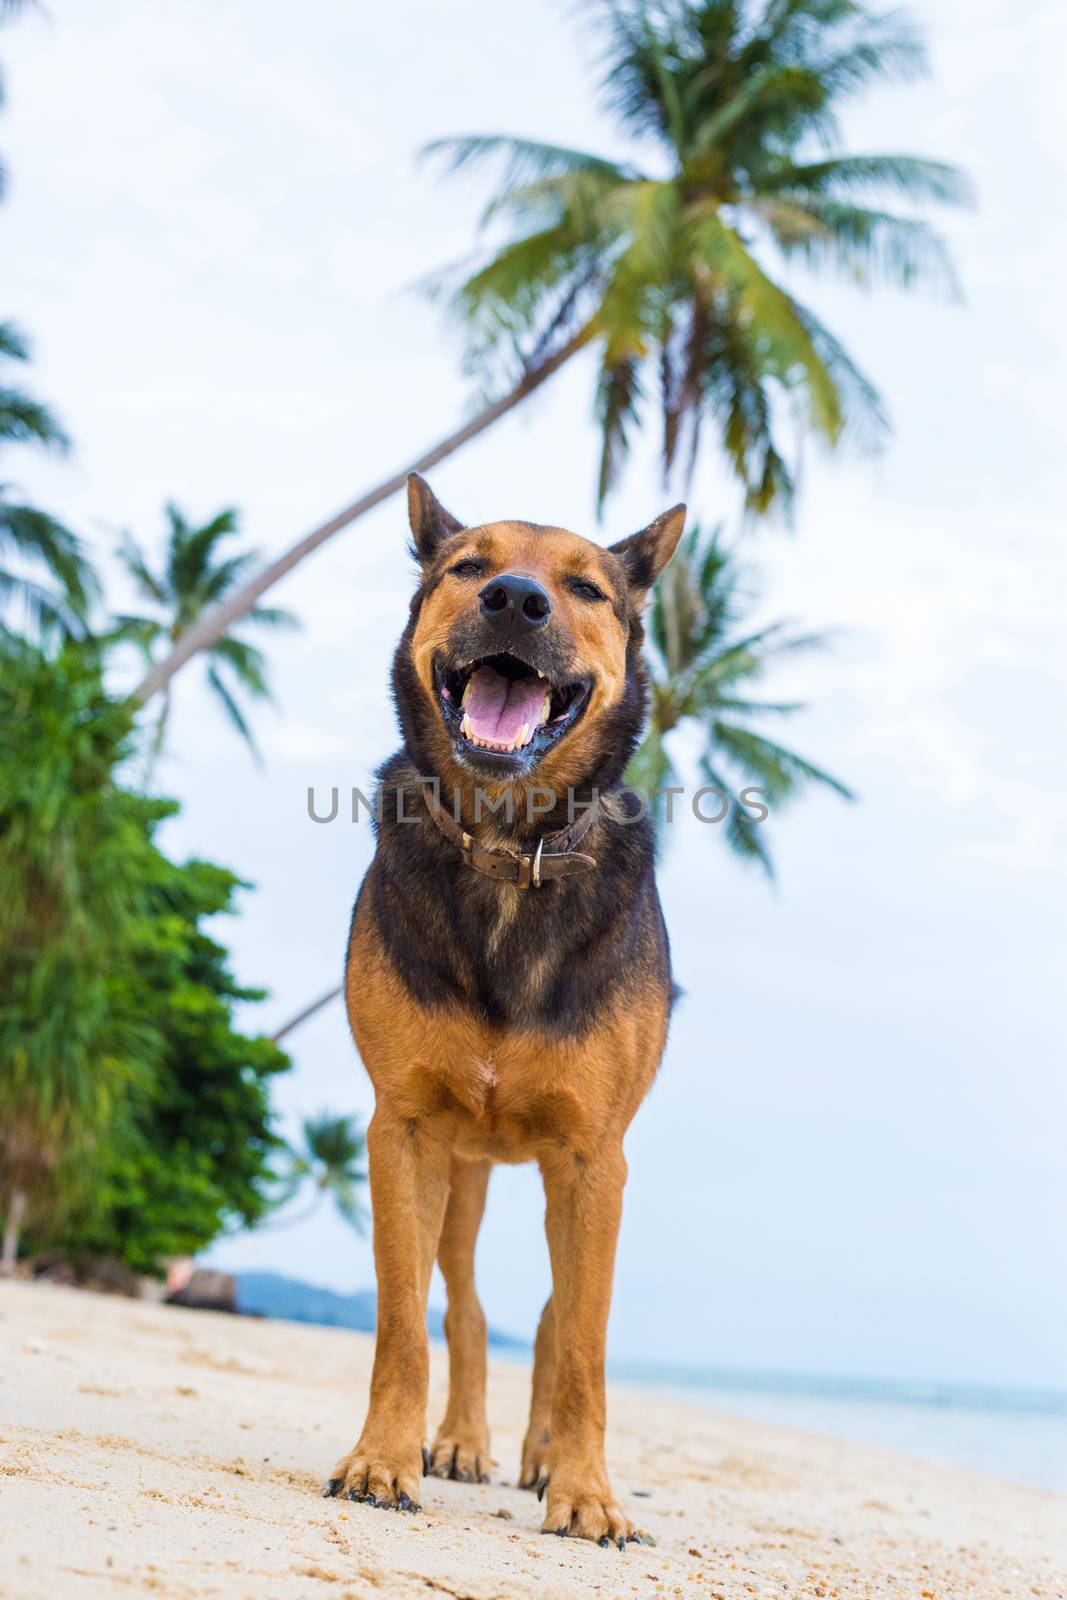 A happy dog  playing at the beach. summer concept